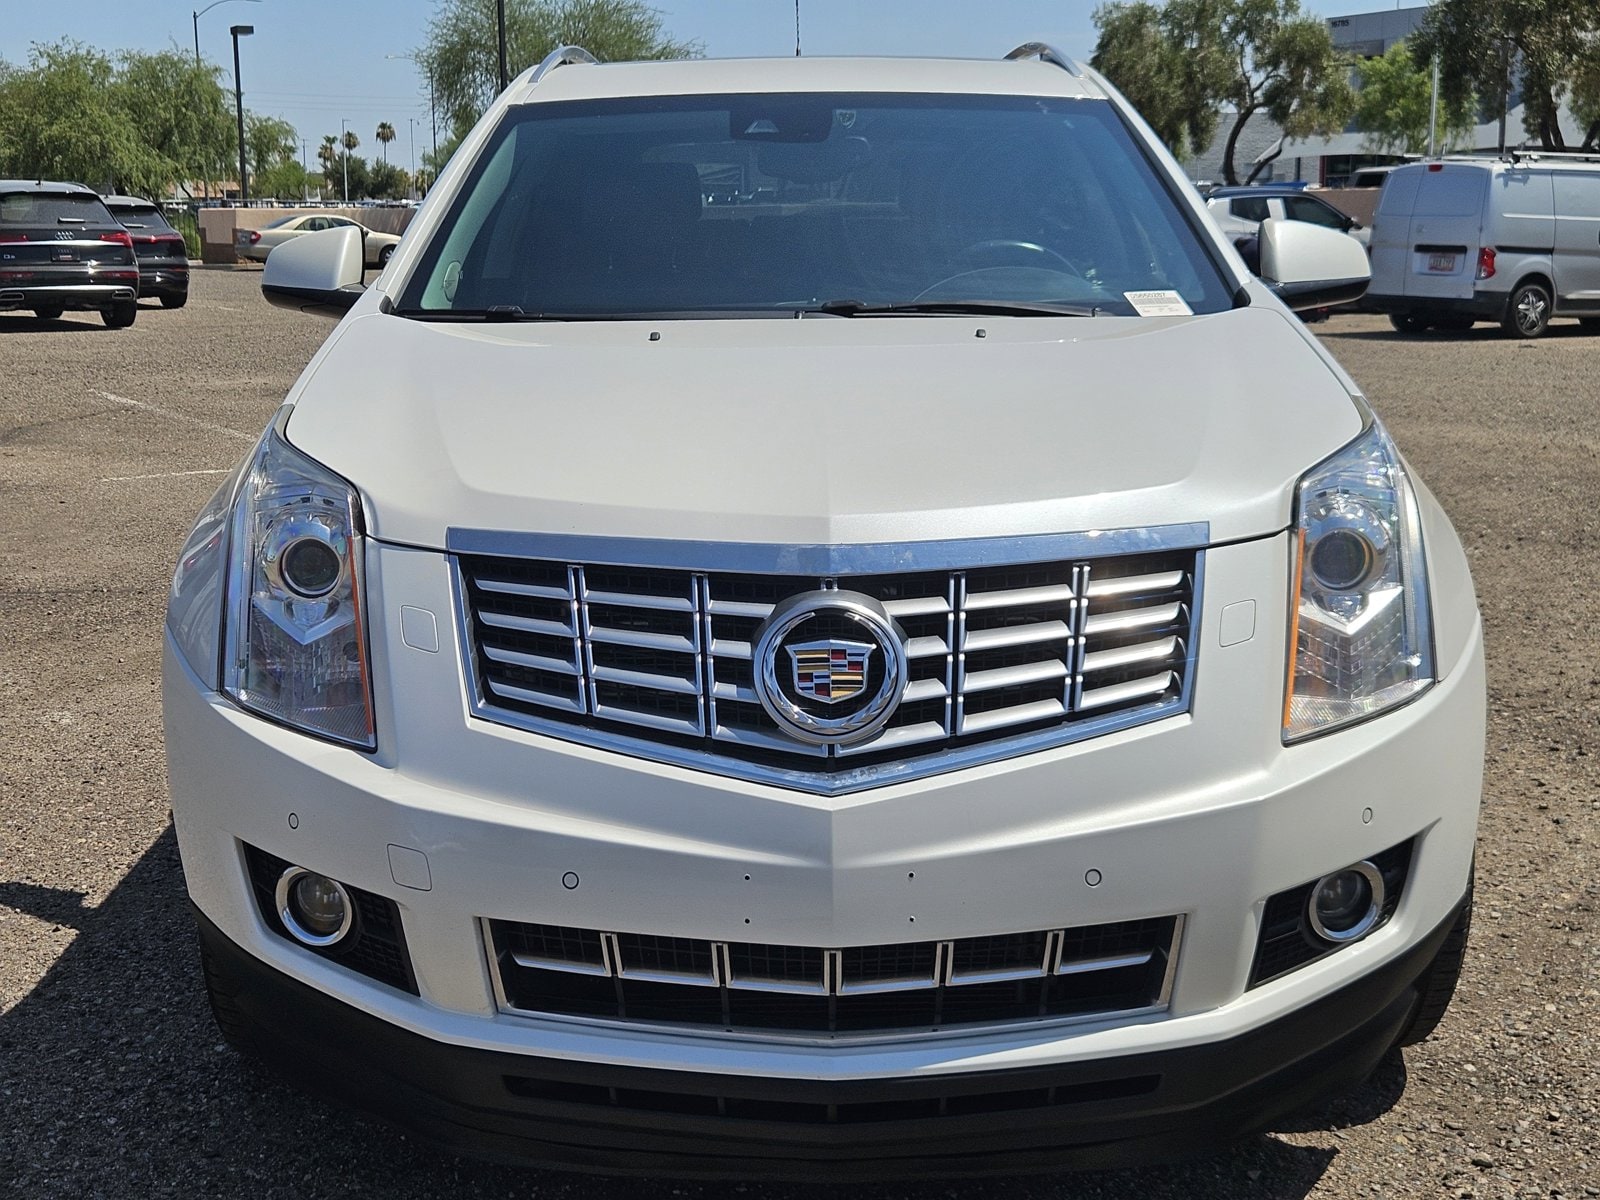 Used 2013 Cadillac SRX Premium Collection with VIN 3GYFNJE3XDS650287 for sale in Peoria, AZ